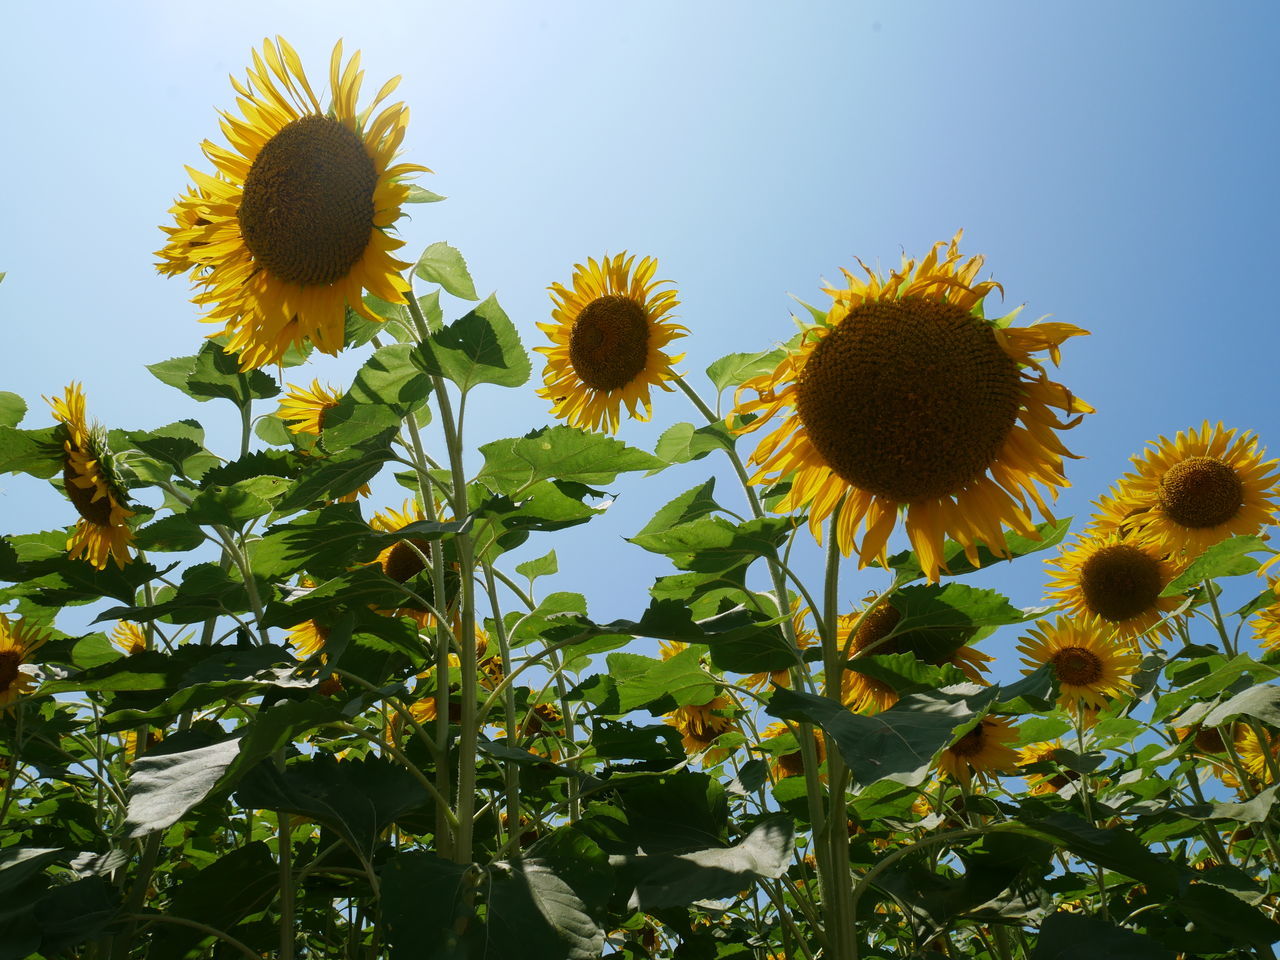 LOW ANGLE VIEW OF SUNFLOWERS ON PLANT